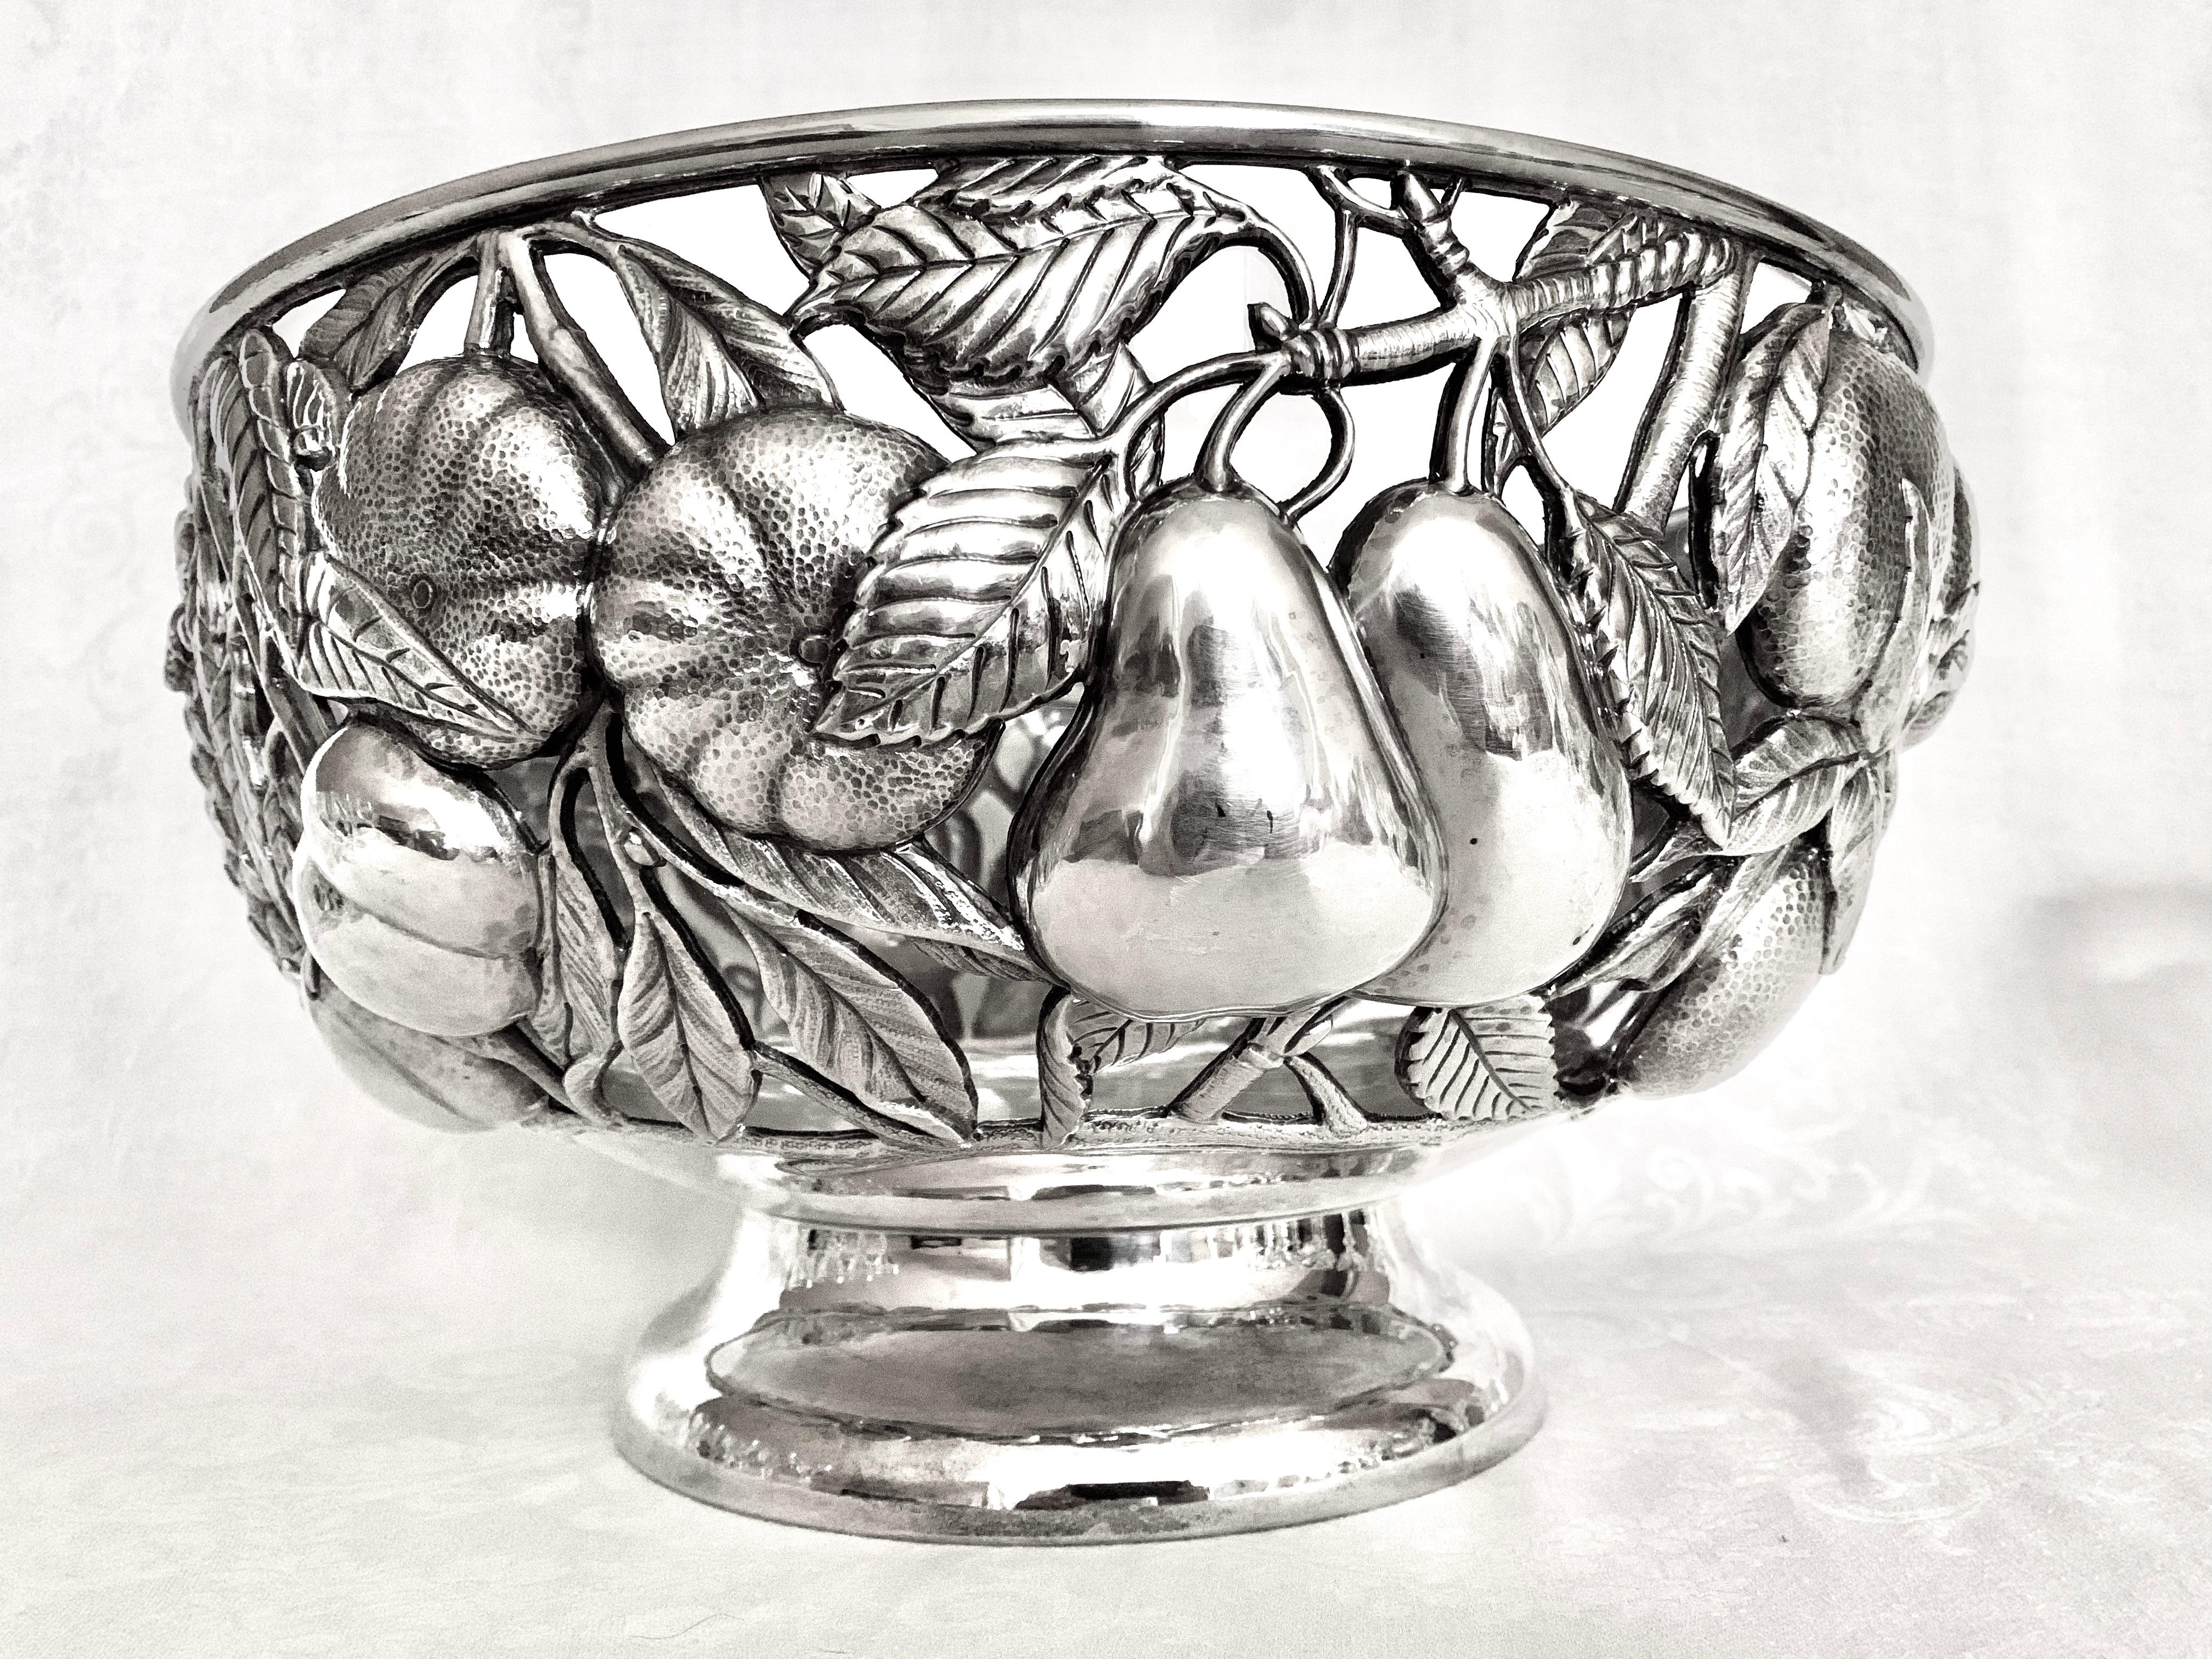 Mid-Century Modern Fratelli Cacchione Immense Sterling Silver Centerpiece Bowl, Milan, Italy, 1960s For Sale